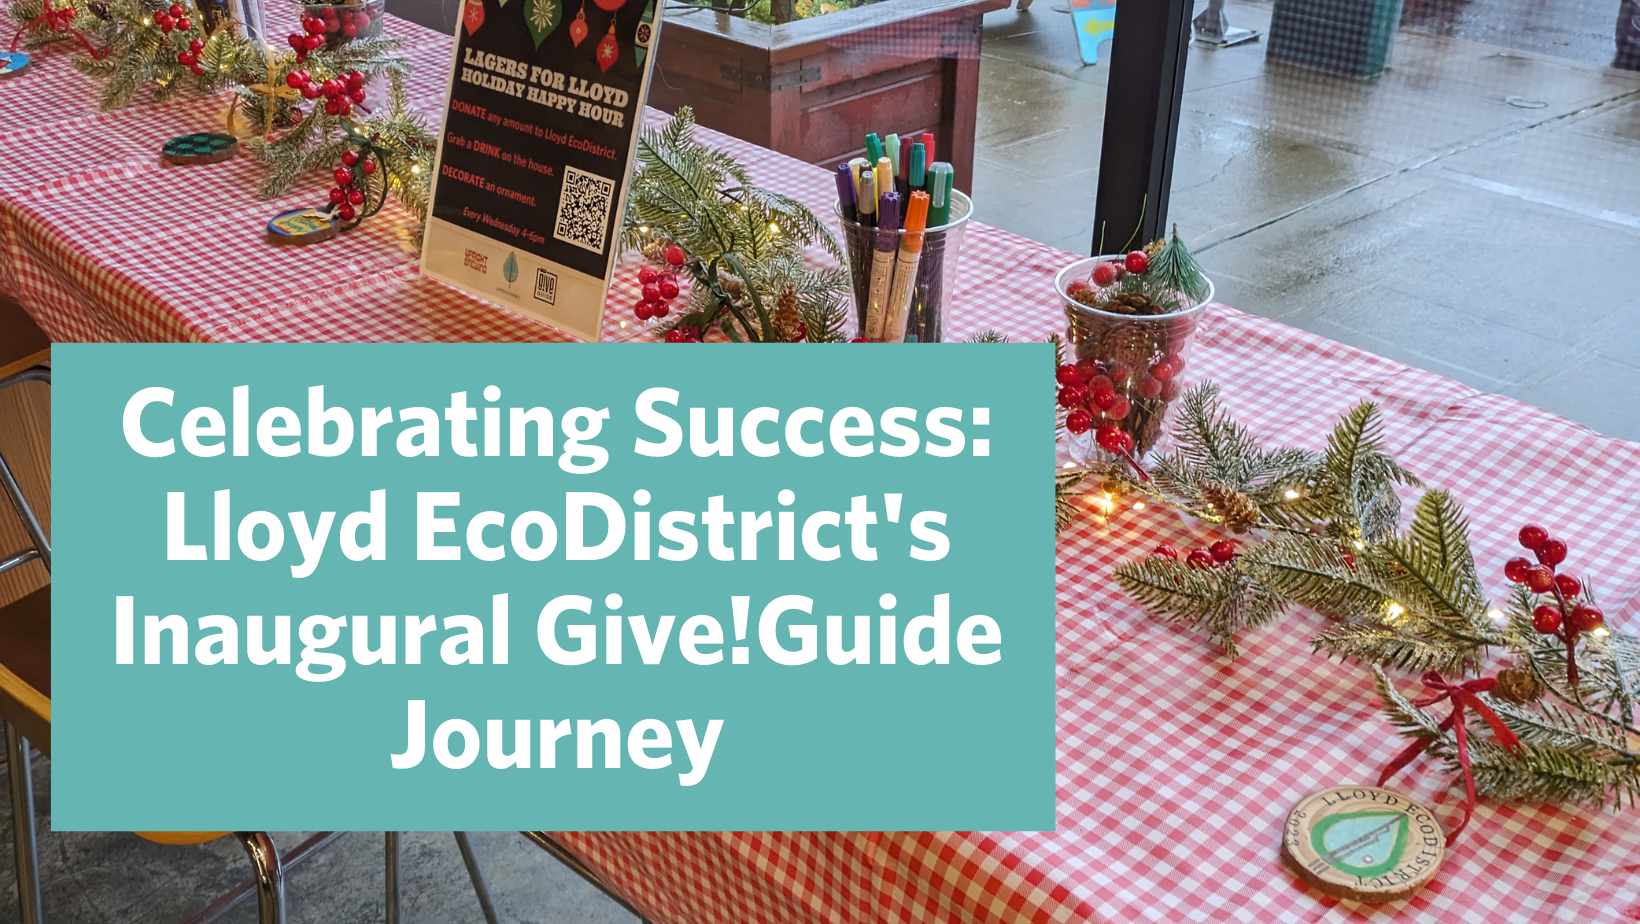 Celebrating Success: Lloyd EcoDistrict’s Inaugural Give!Guide Journey